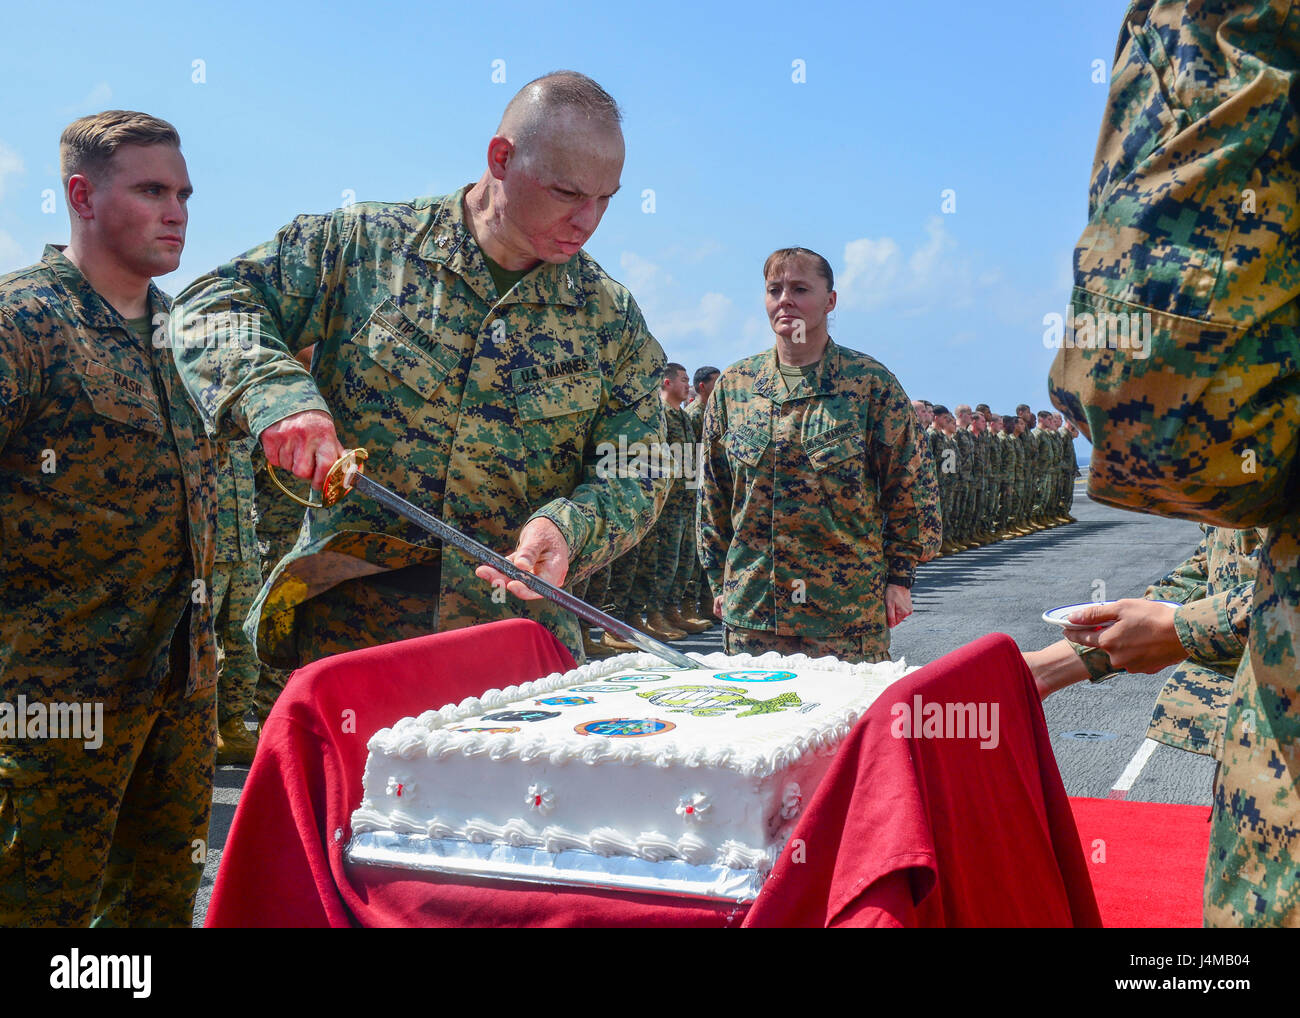 161110-N-LI768-174 SOUTH CHINA SEA (Nov. 10, 2016) Col. Clay Tipton, commanding officer of the 11th Marine Expeditionary Unit (MEU), ceremoniously cuts a cake during the 241st Marine Corps birthday celebration on the flight deck of the amphibious assault ship USS Makin Island (LHD 8). Makin Island, the flagship of the Makin Island Amphibious Ready Group, is operating in the U.S. 7th Fleet area of operations with the embarked 11th MEU in support of security and stability in the Indo-Asia-Pacific region. (U.S. Navy photo by Petty Officer 3rd Class Devin M. Langer/Released) Stock Photo